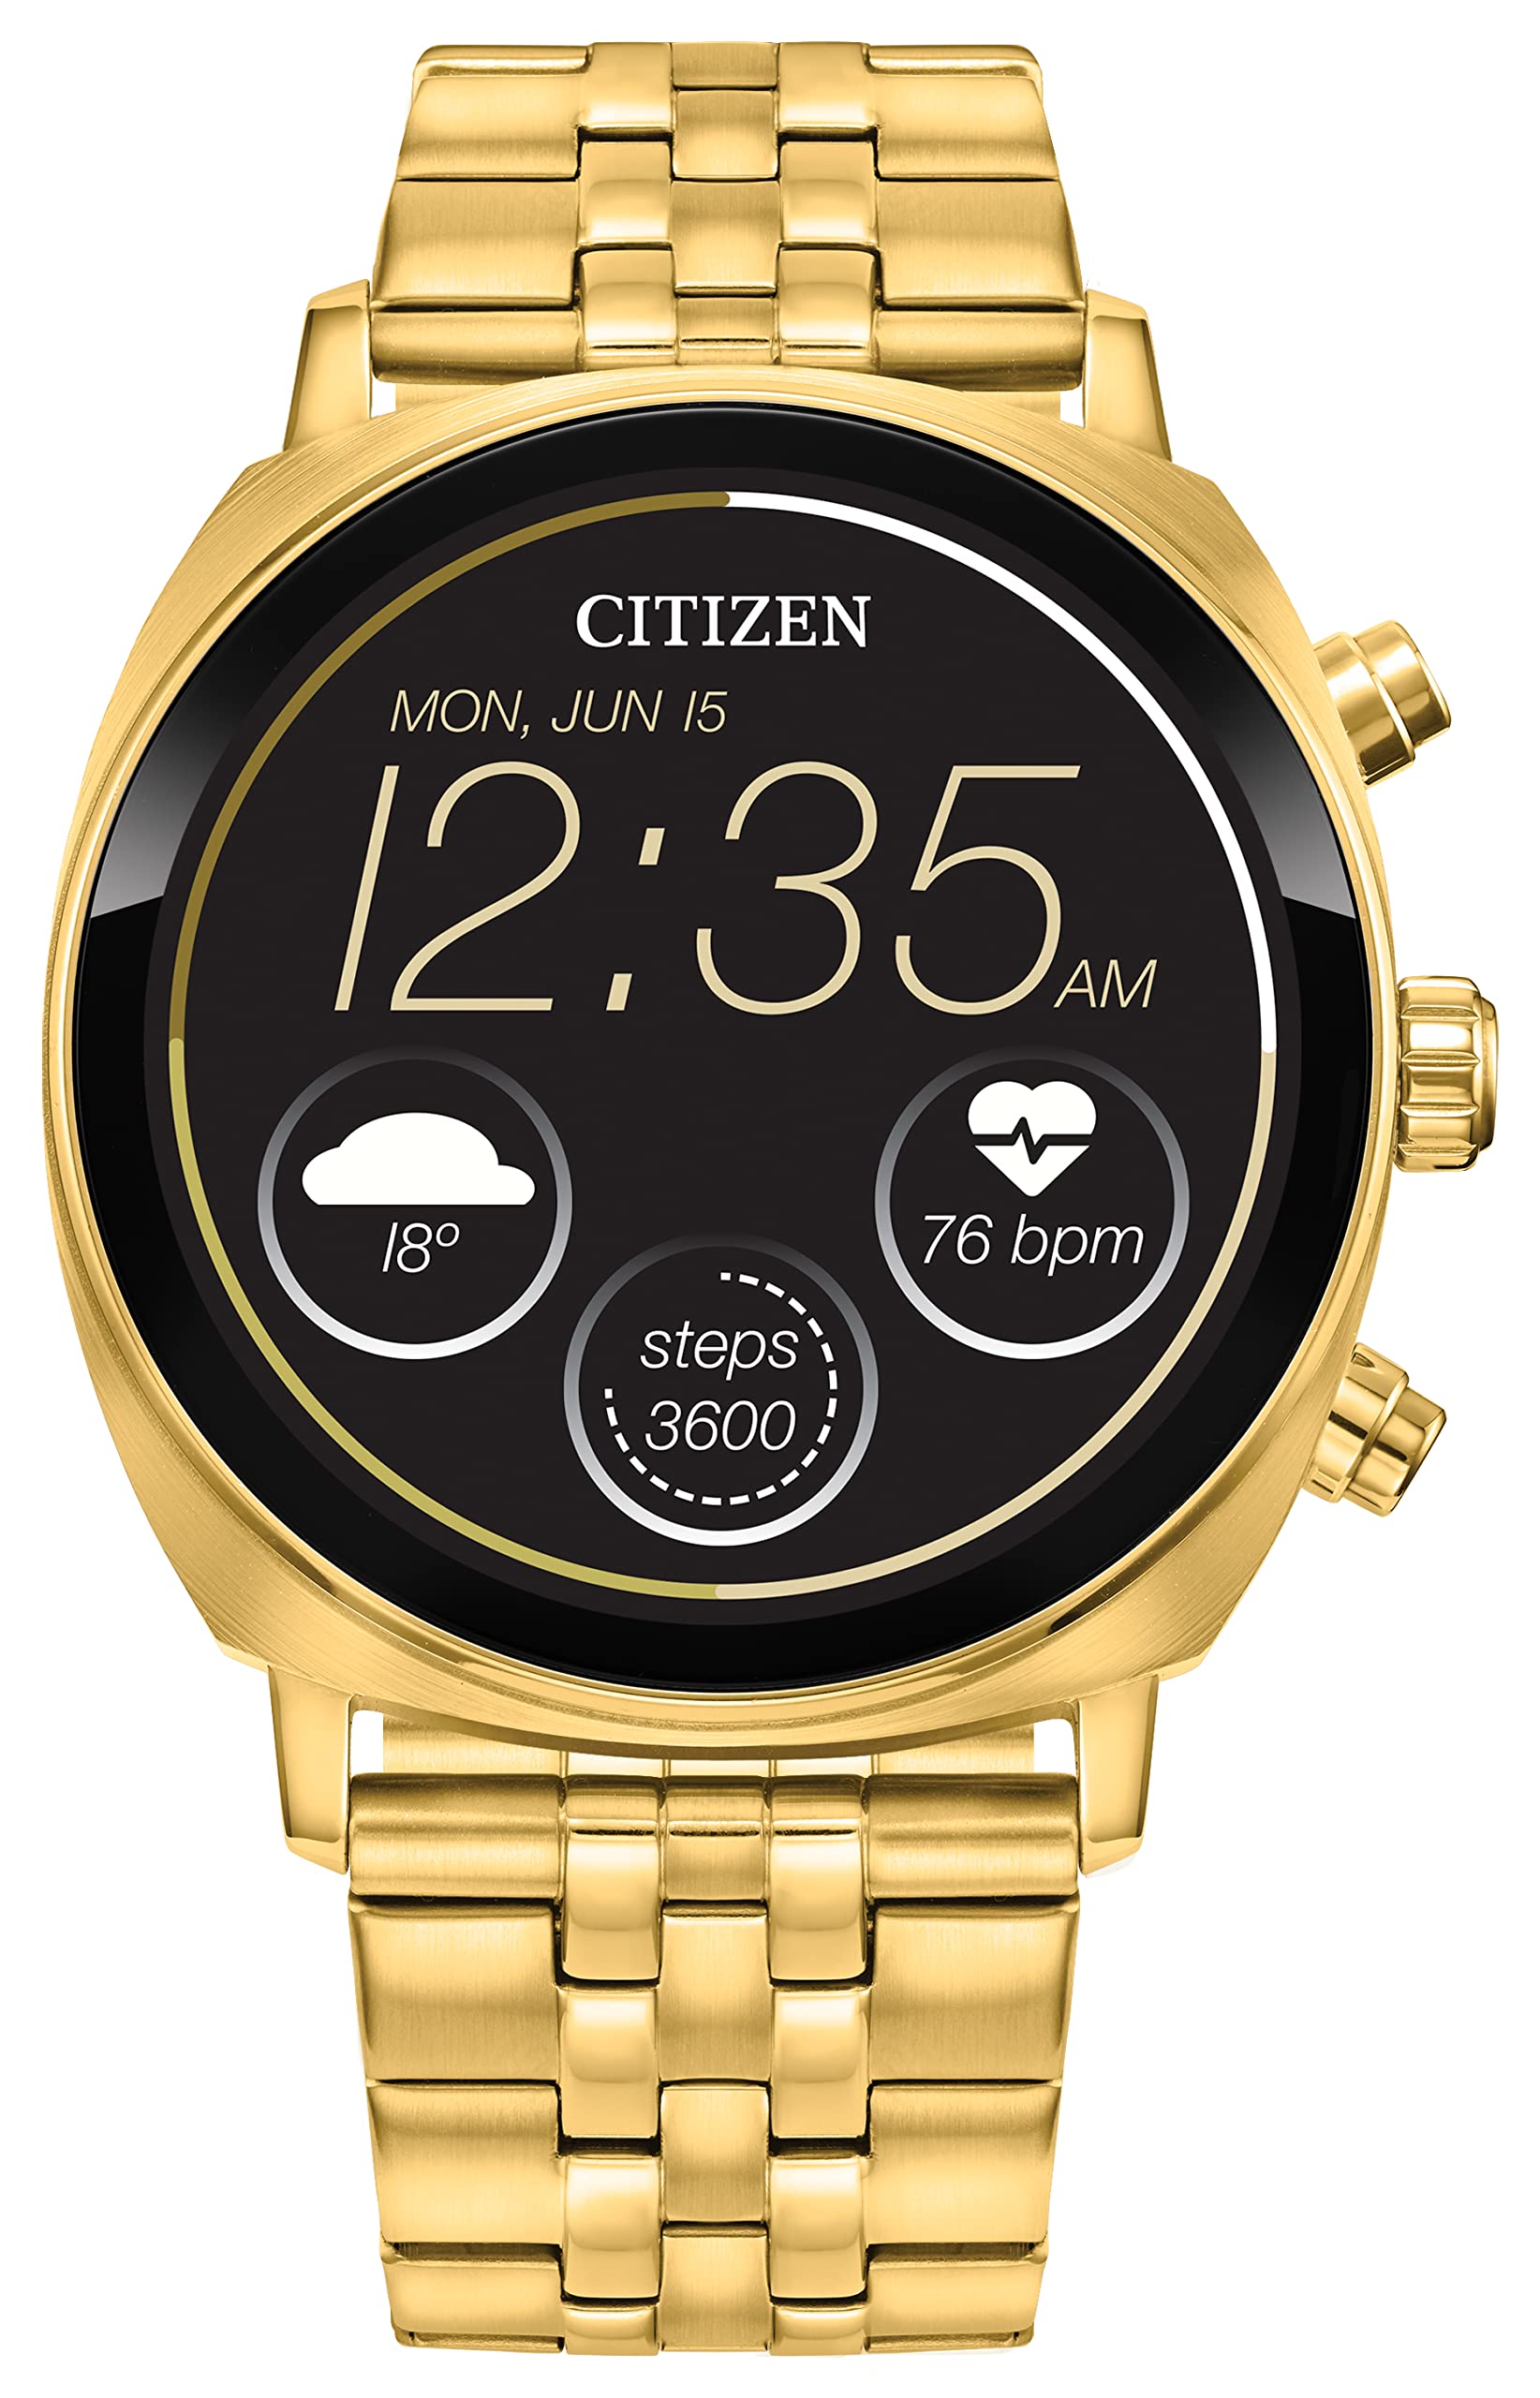 Citizen CZ Smart PQ2 41MM Unisex Smartwatch with YouQ App with IBM Watson® AI and NASA research, Wear OS by Google, HR, GPS, Fitness Tracker, Amazon Alexa™, iPhone Android Compatible, IPX6 Rating